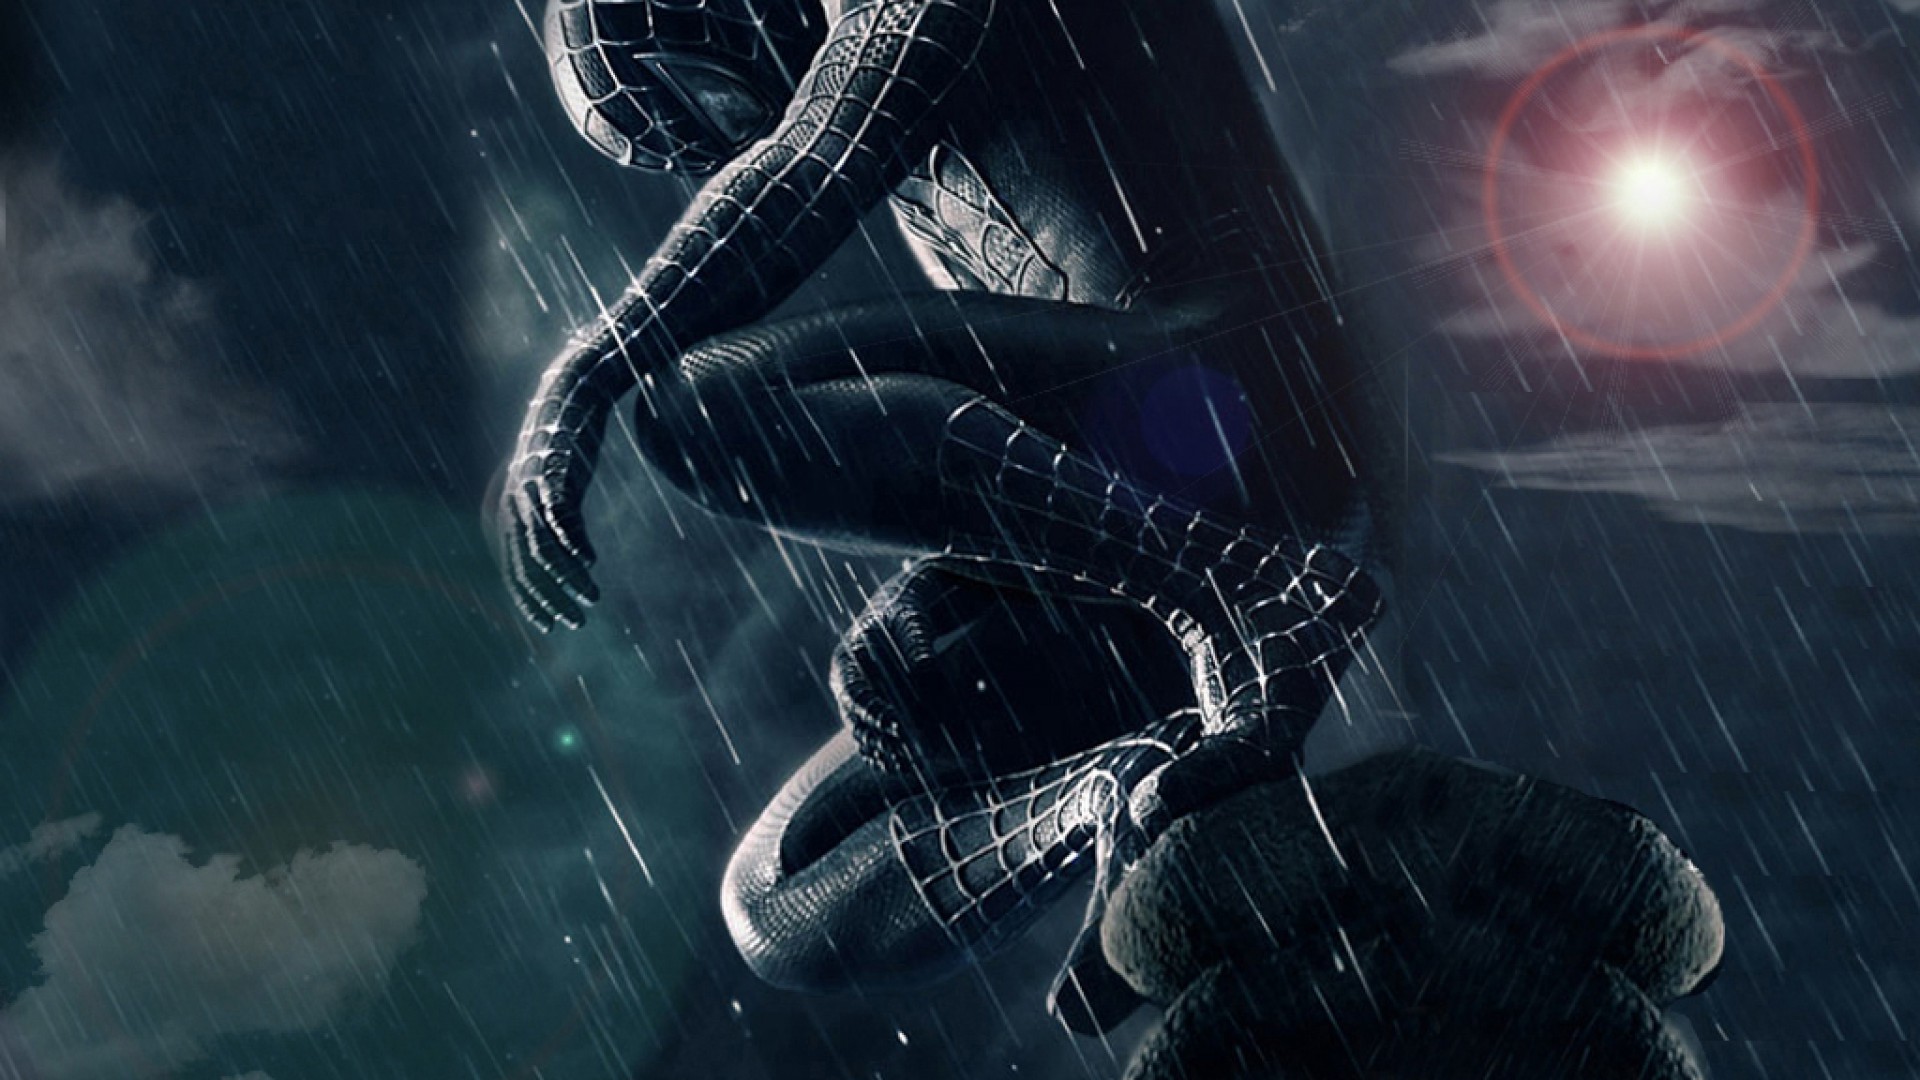 Spiderman 1080P, 1920x1080 HD Wallpaper and FREE Stock Photo